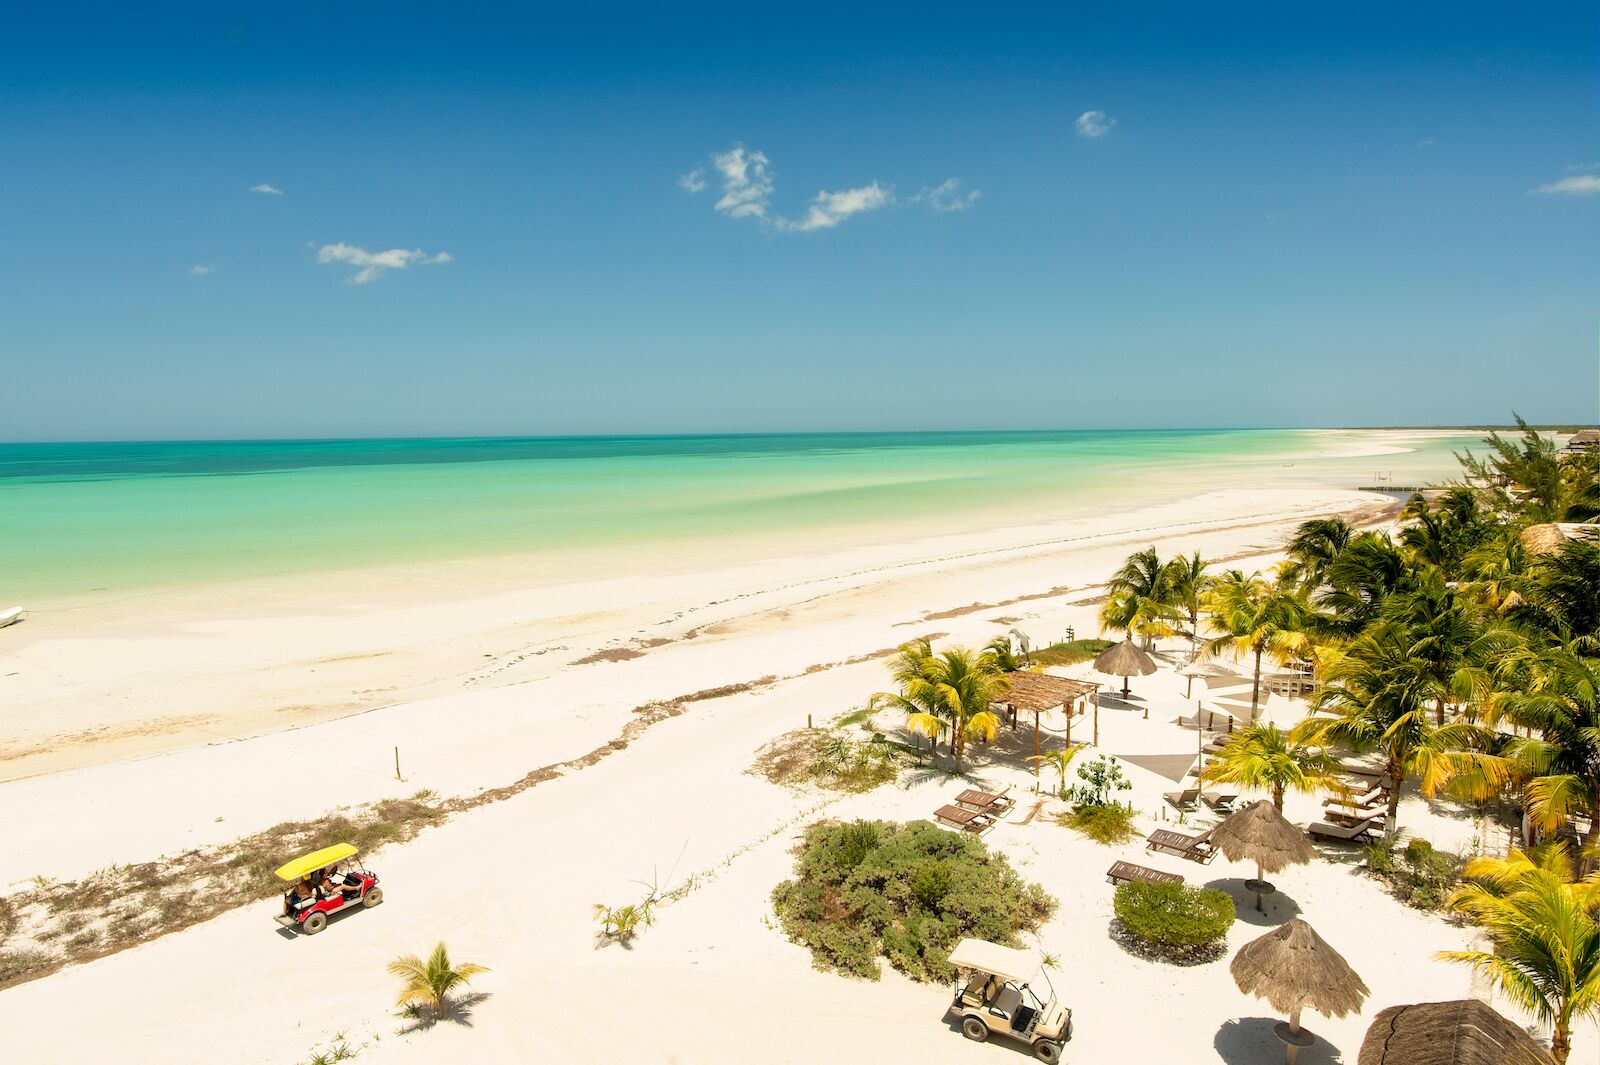 Panoramic view of the beach Caribbean Sea view in Holbox island Mexico. Low tide creates islands of sand in the middle of the turquoise sea